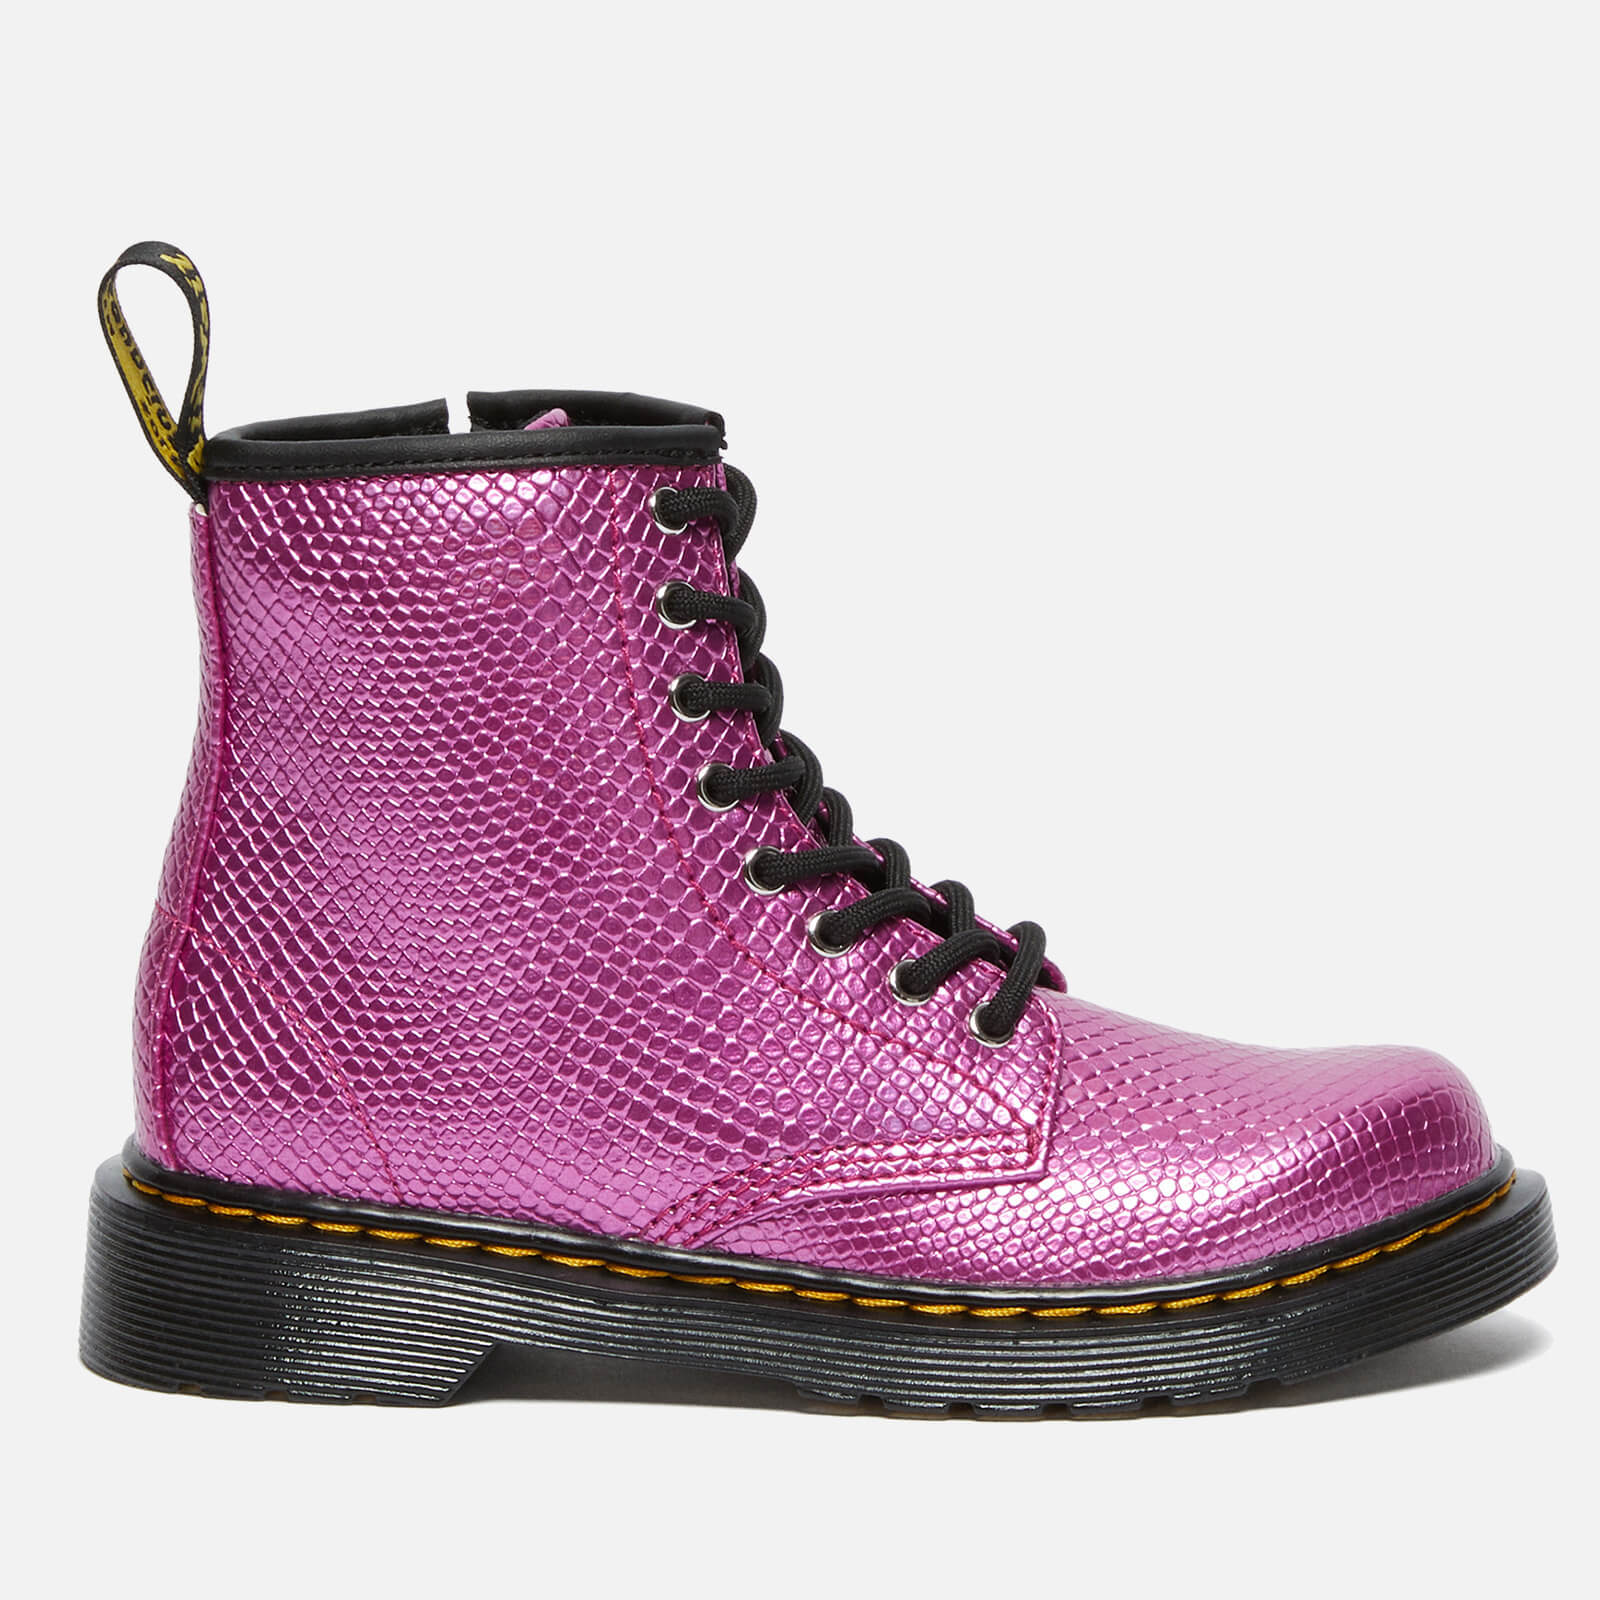 Dr. Martens Kids' 1460 Patent Lamper Lace Up Boots - Pink Reptile Emboss - UK 1 Kids